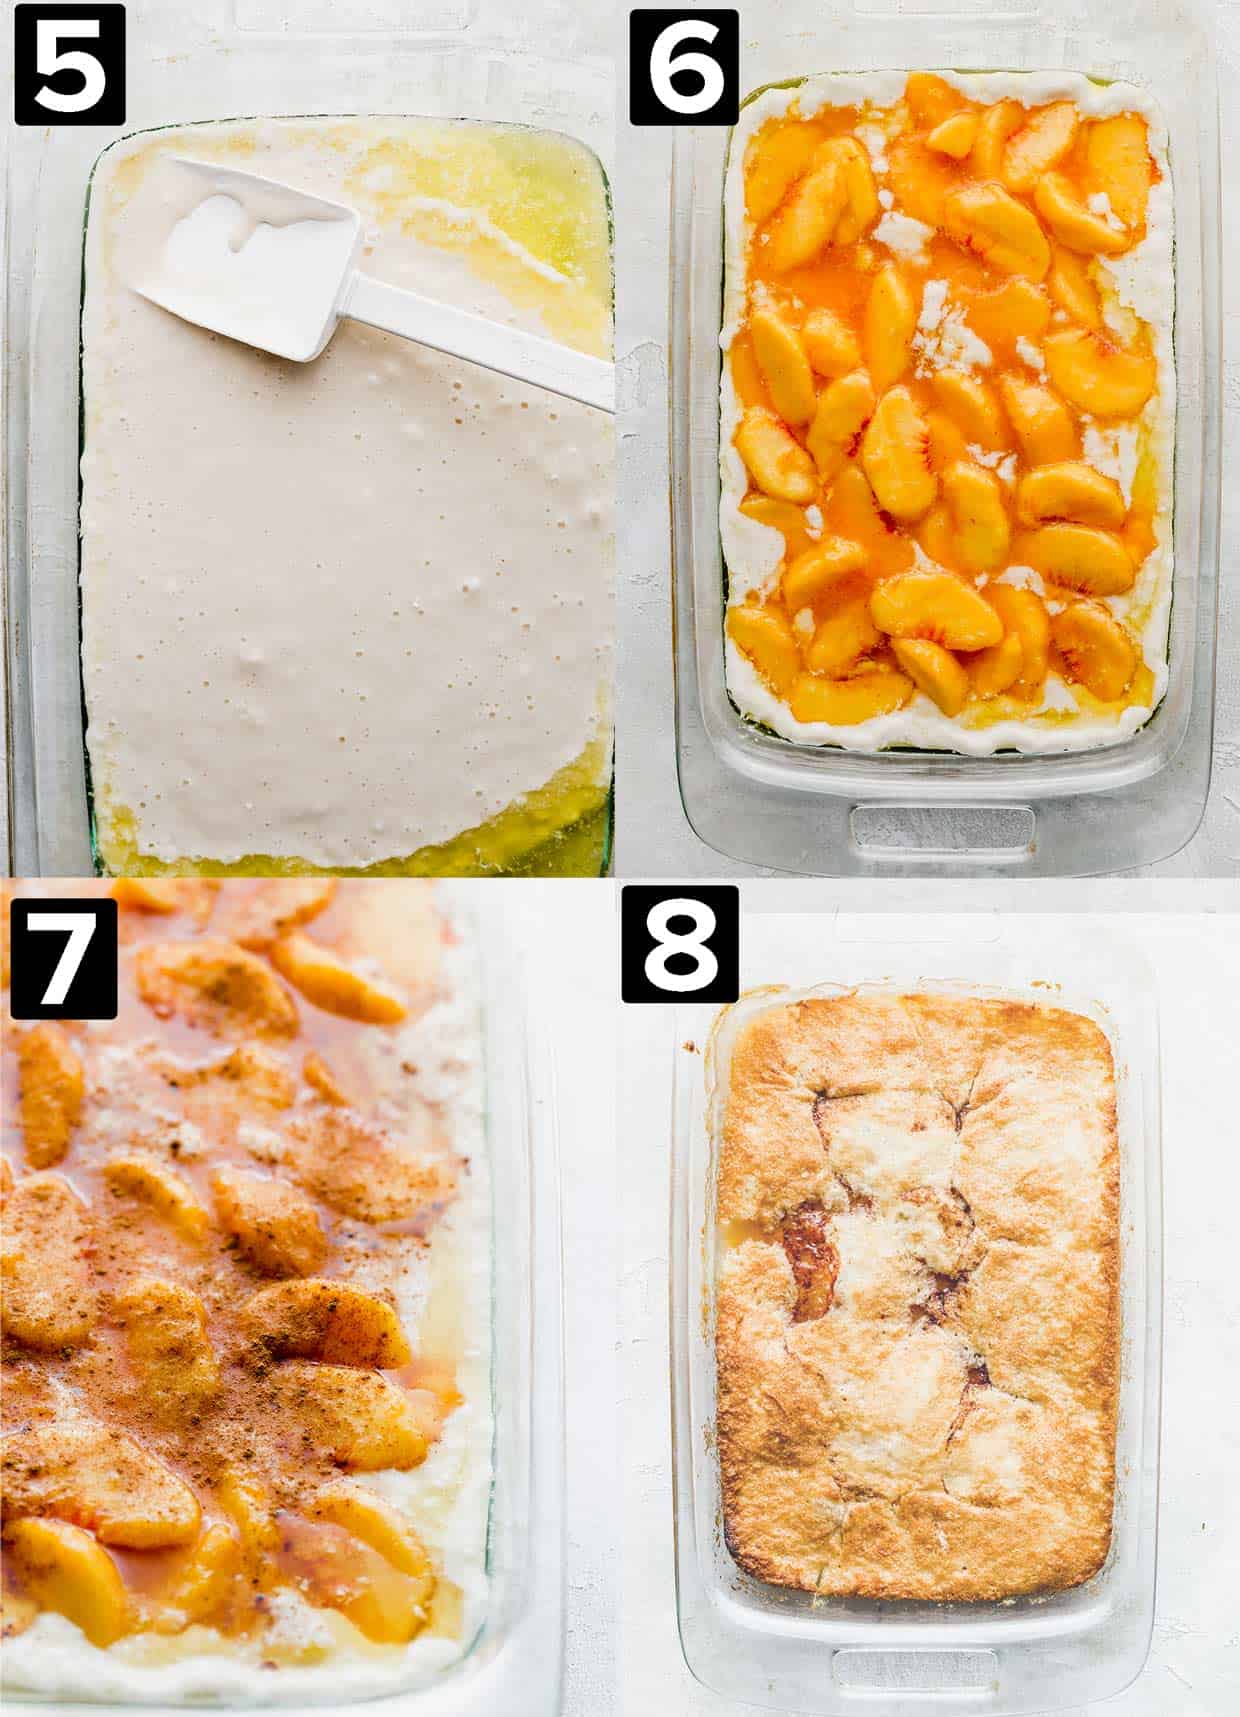 Four images showing how to make easy peach cobbler recipe: spatula spreading batter over melted butter, peach topping in the pan, cinnamon sprinkled over the peaches, final baked peach cobbler. 